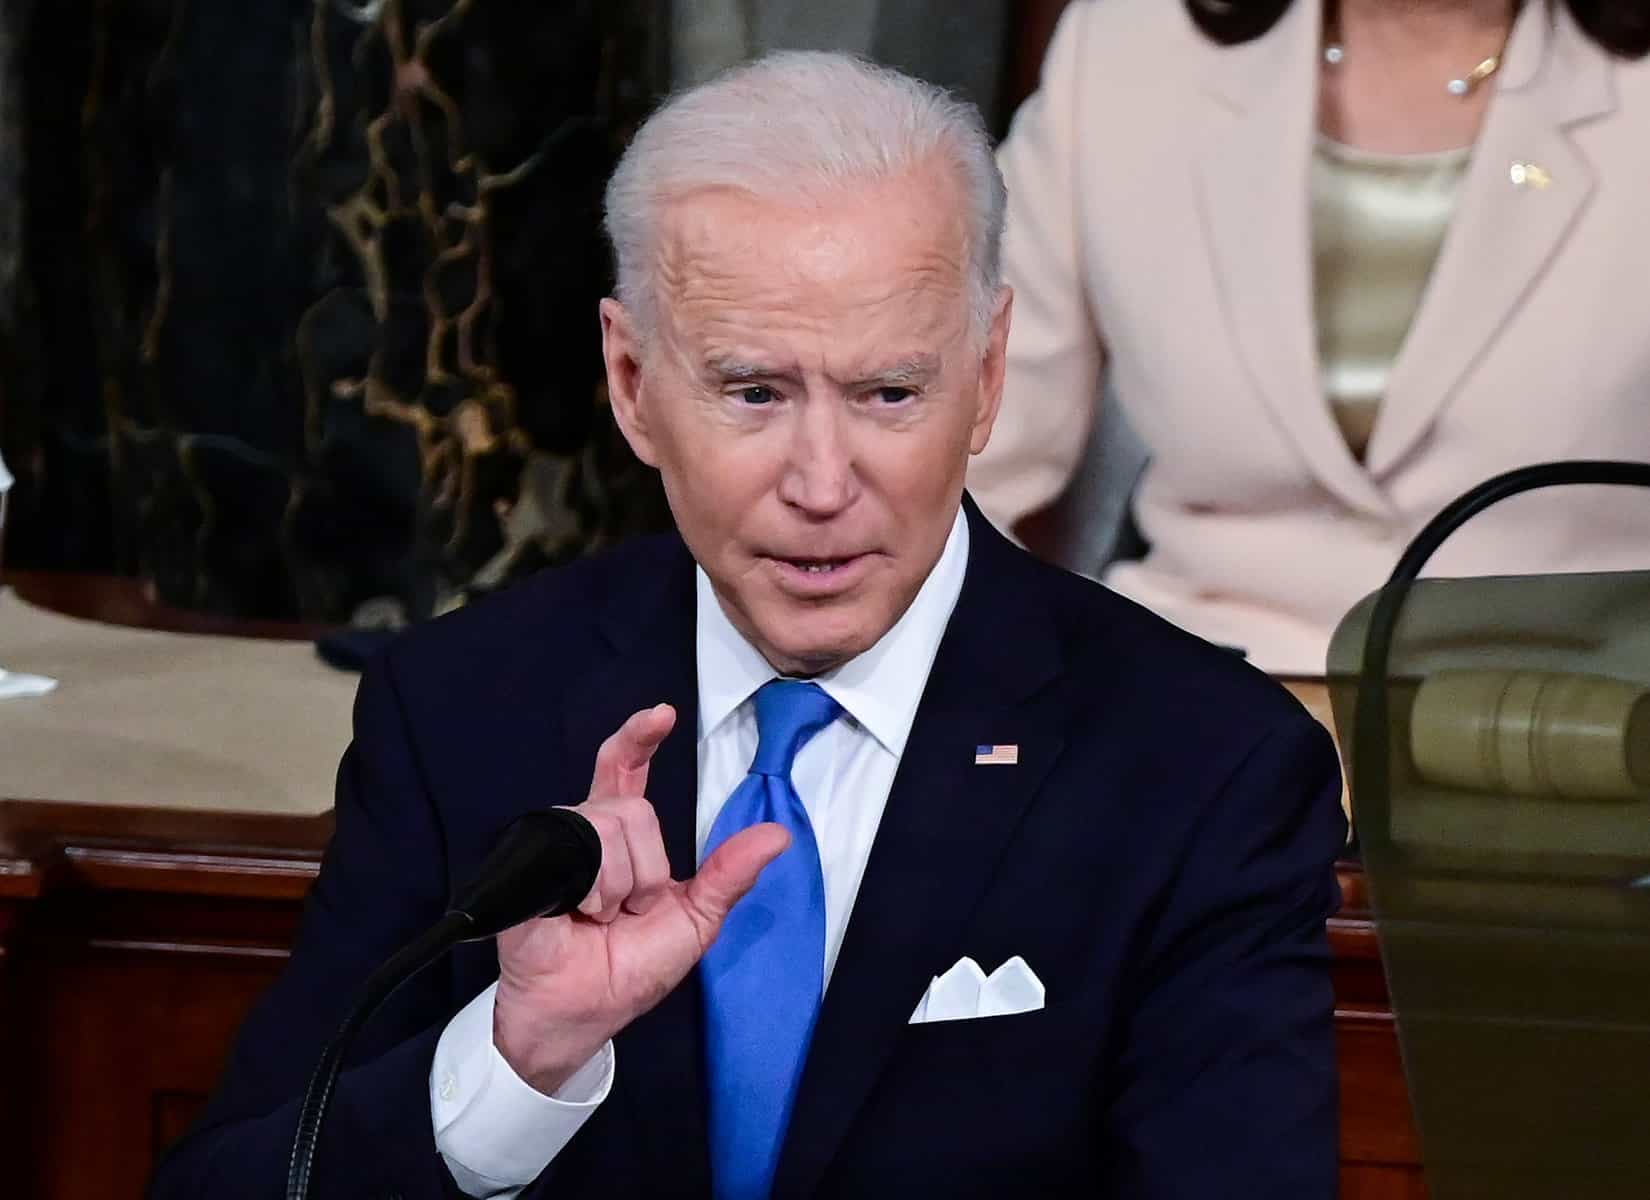 President Biden To Deliver The State Of The Union On February 7